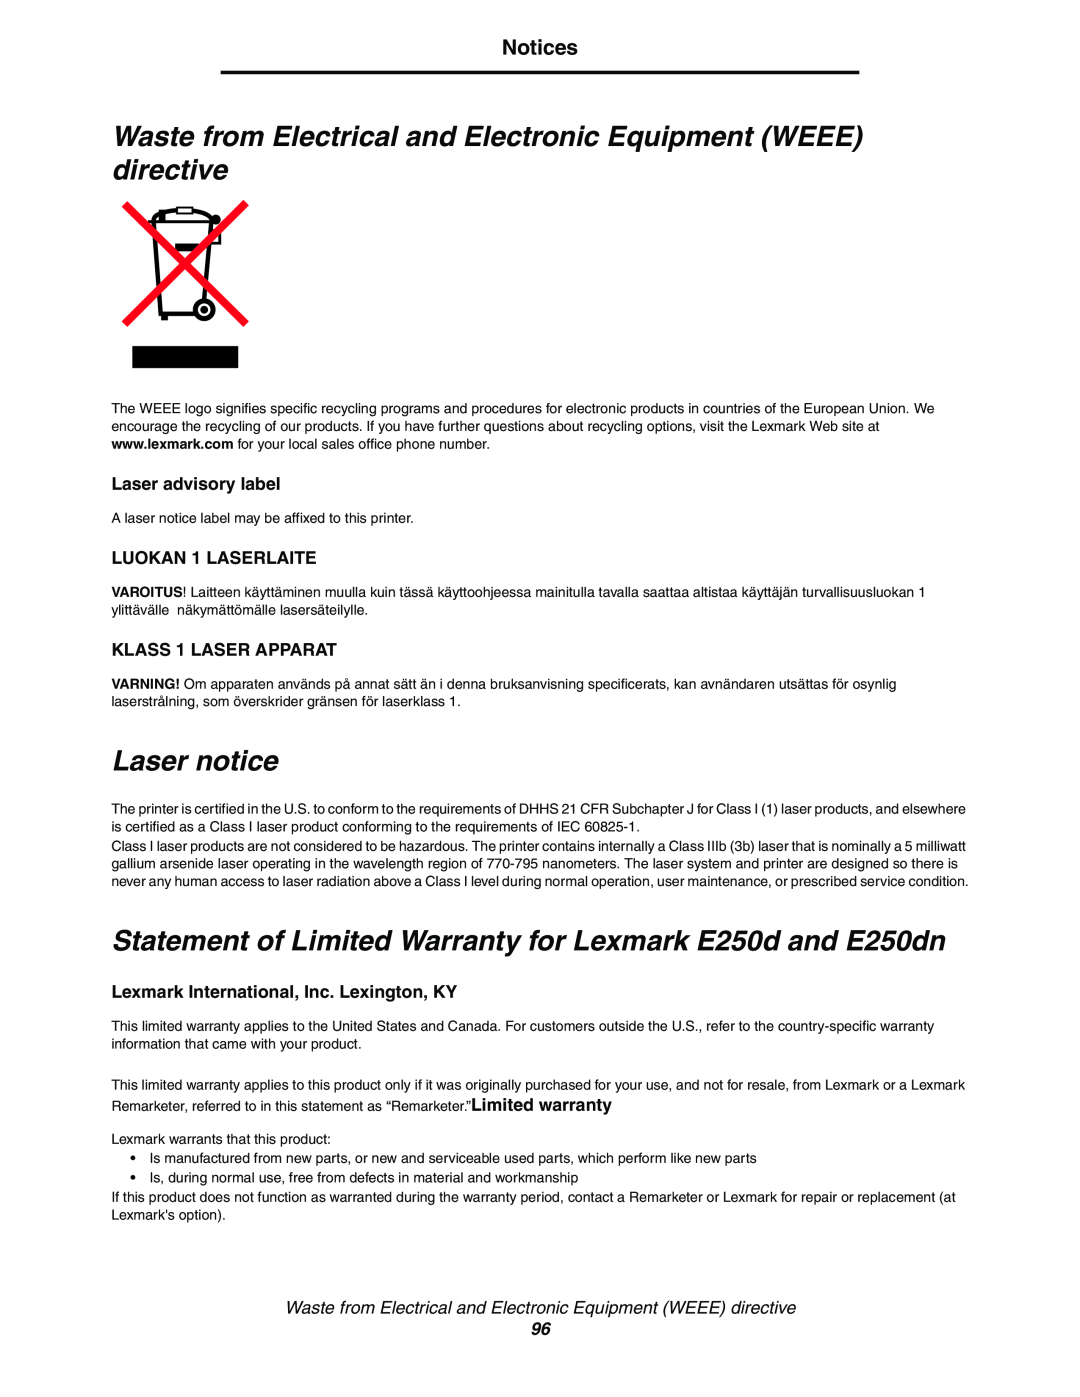 Lexmark 250dn Waste from Electrical and Electronic Equipment WEEE directive, Laser notice, Laser advisory label, Notices 